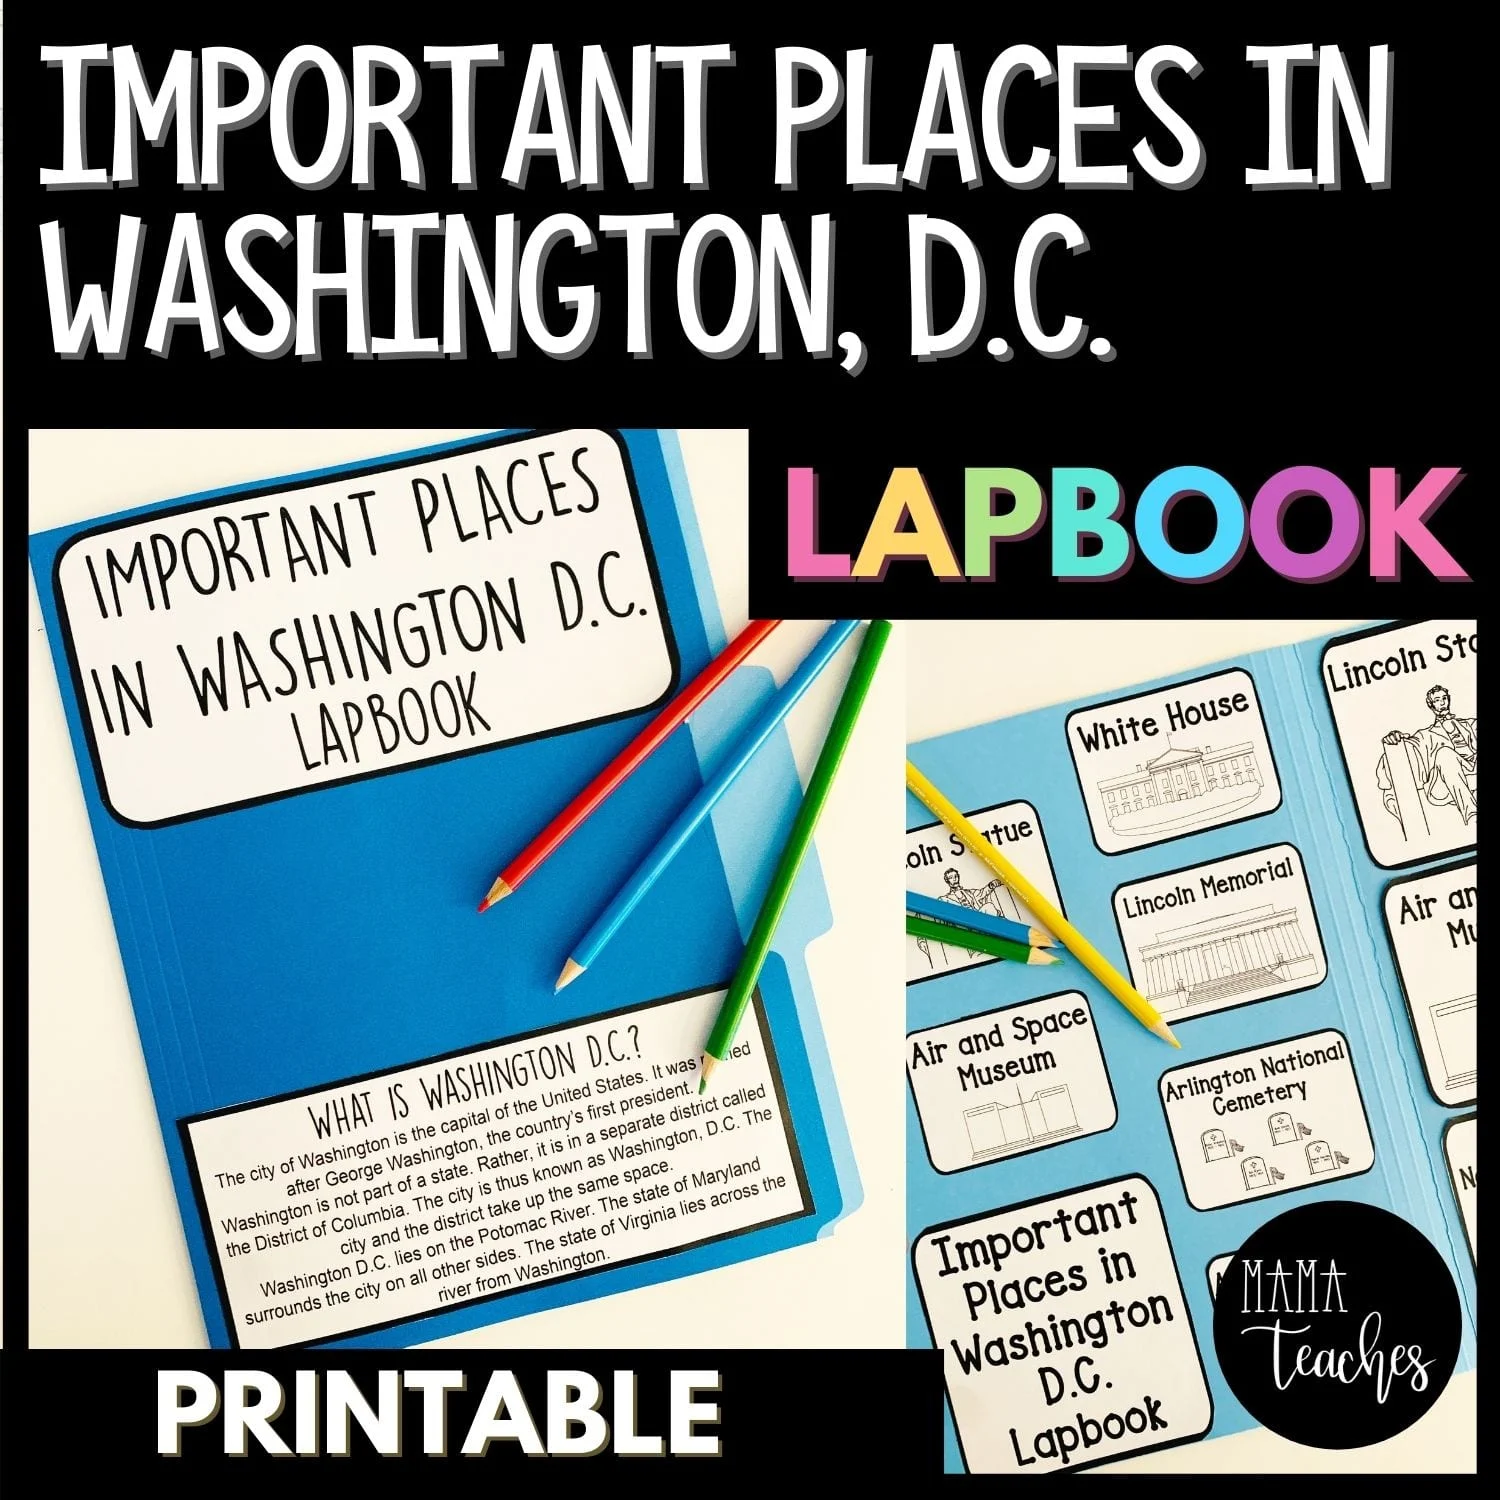 Important Places in Washington, D.C. - a Lapbook to Teach Children About Important Locations in the U.S. Capital